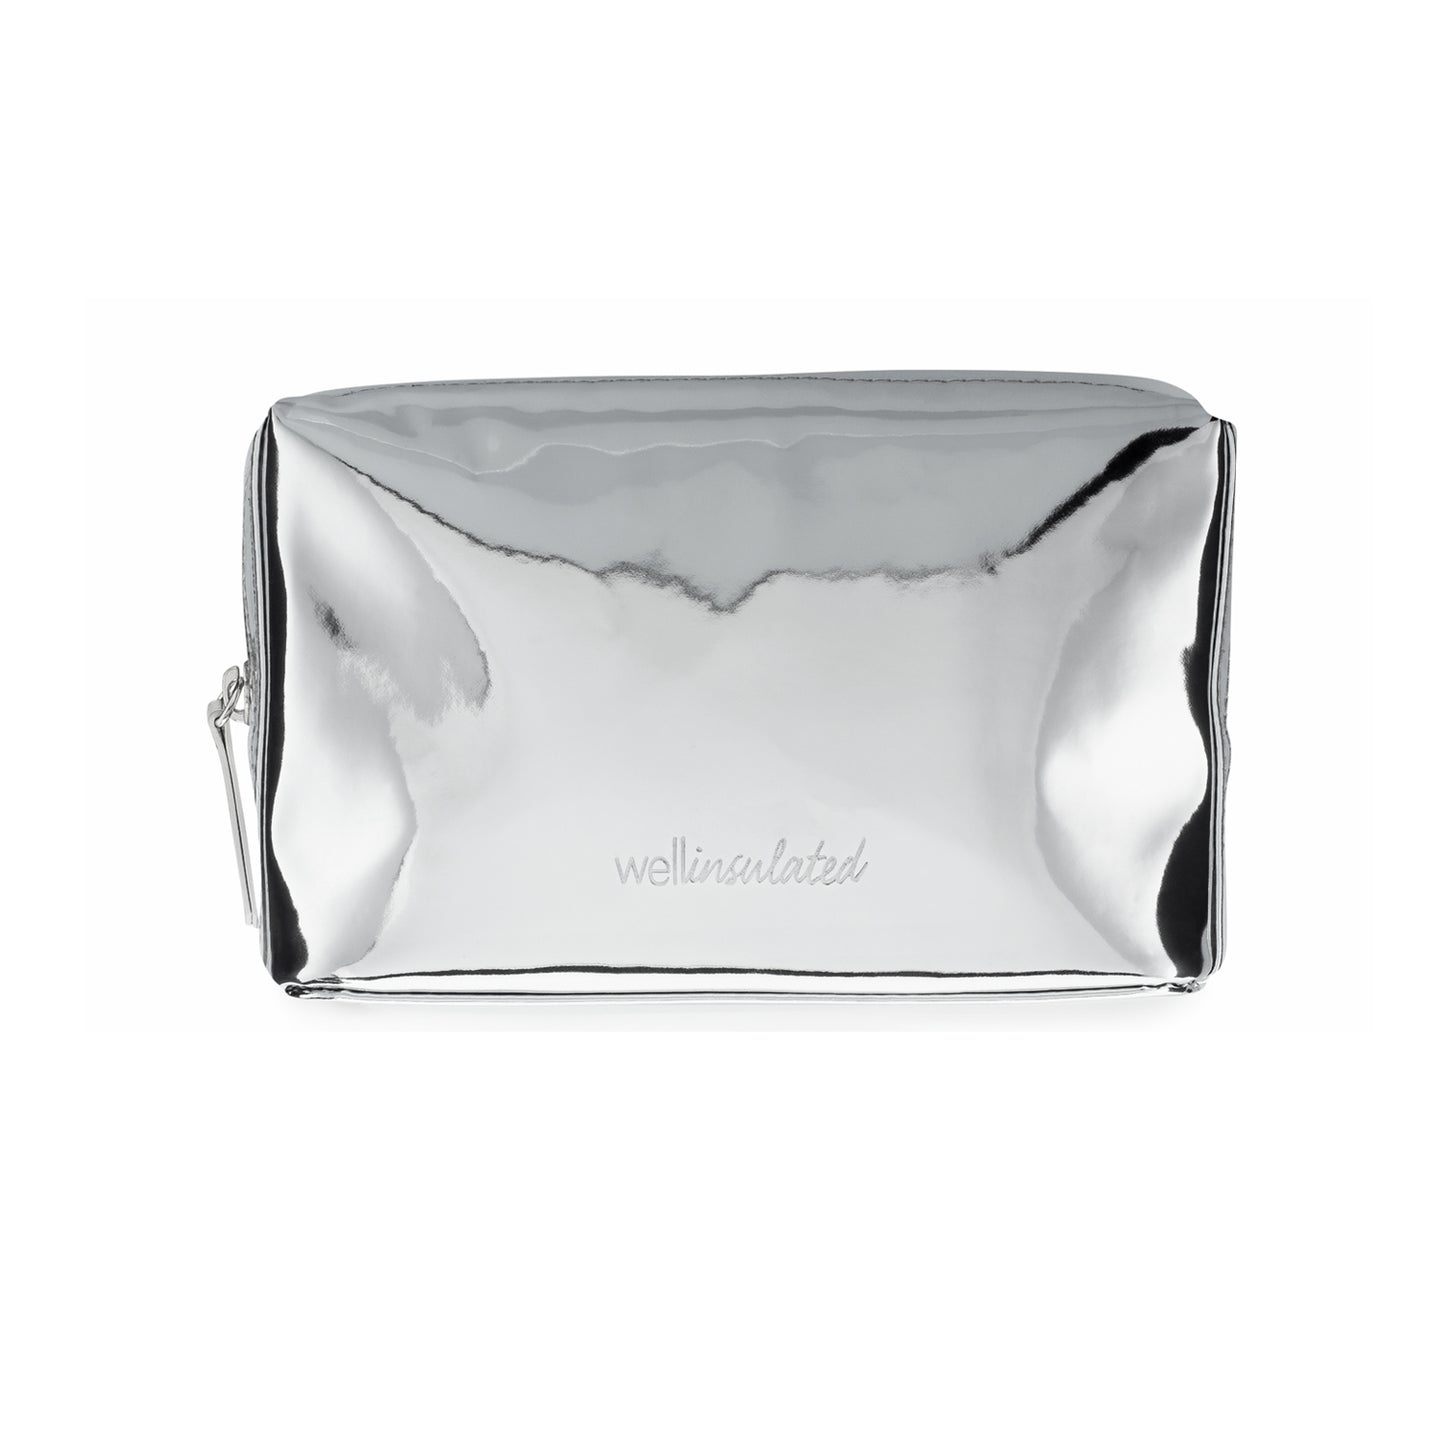 The Well Insulated Beauty Bag shown from the front. The bag is silver with the well insulated logo embossed on it.